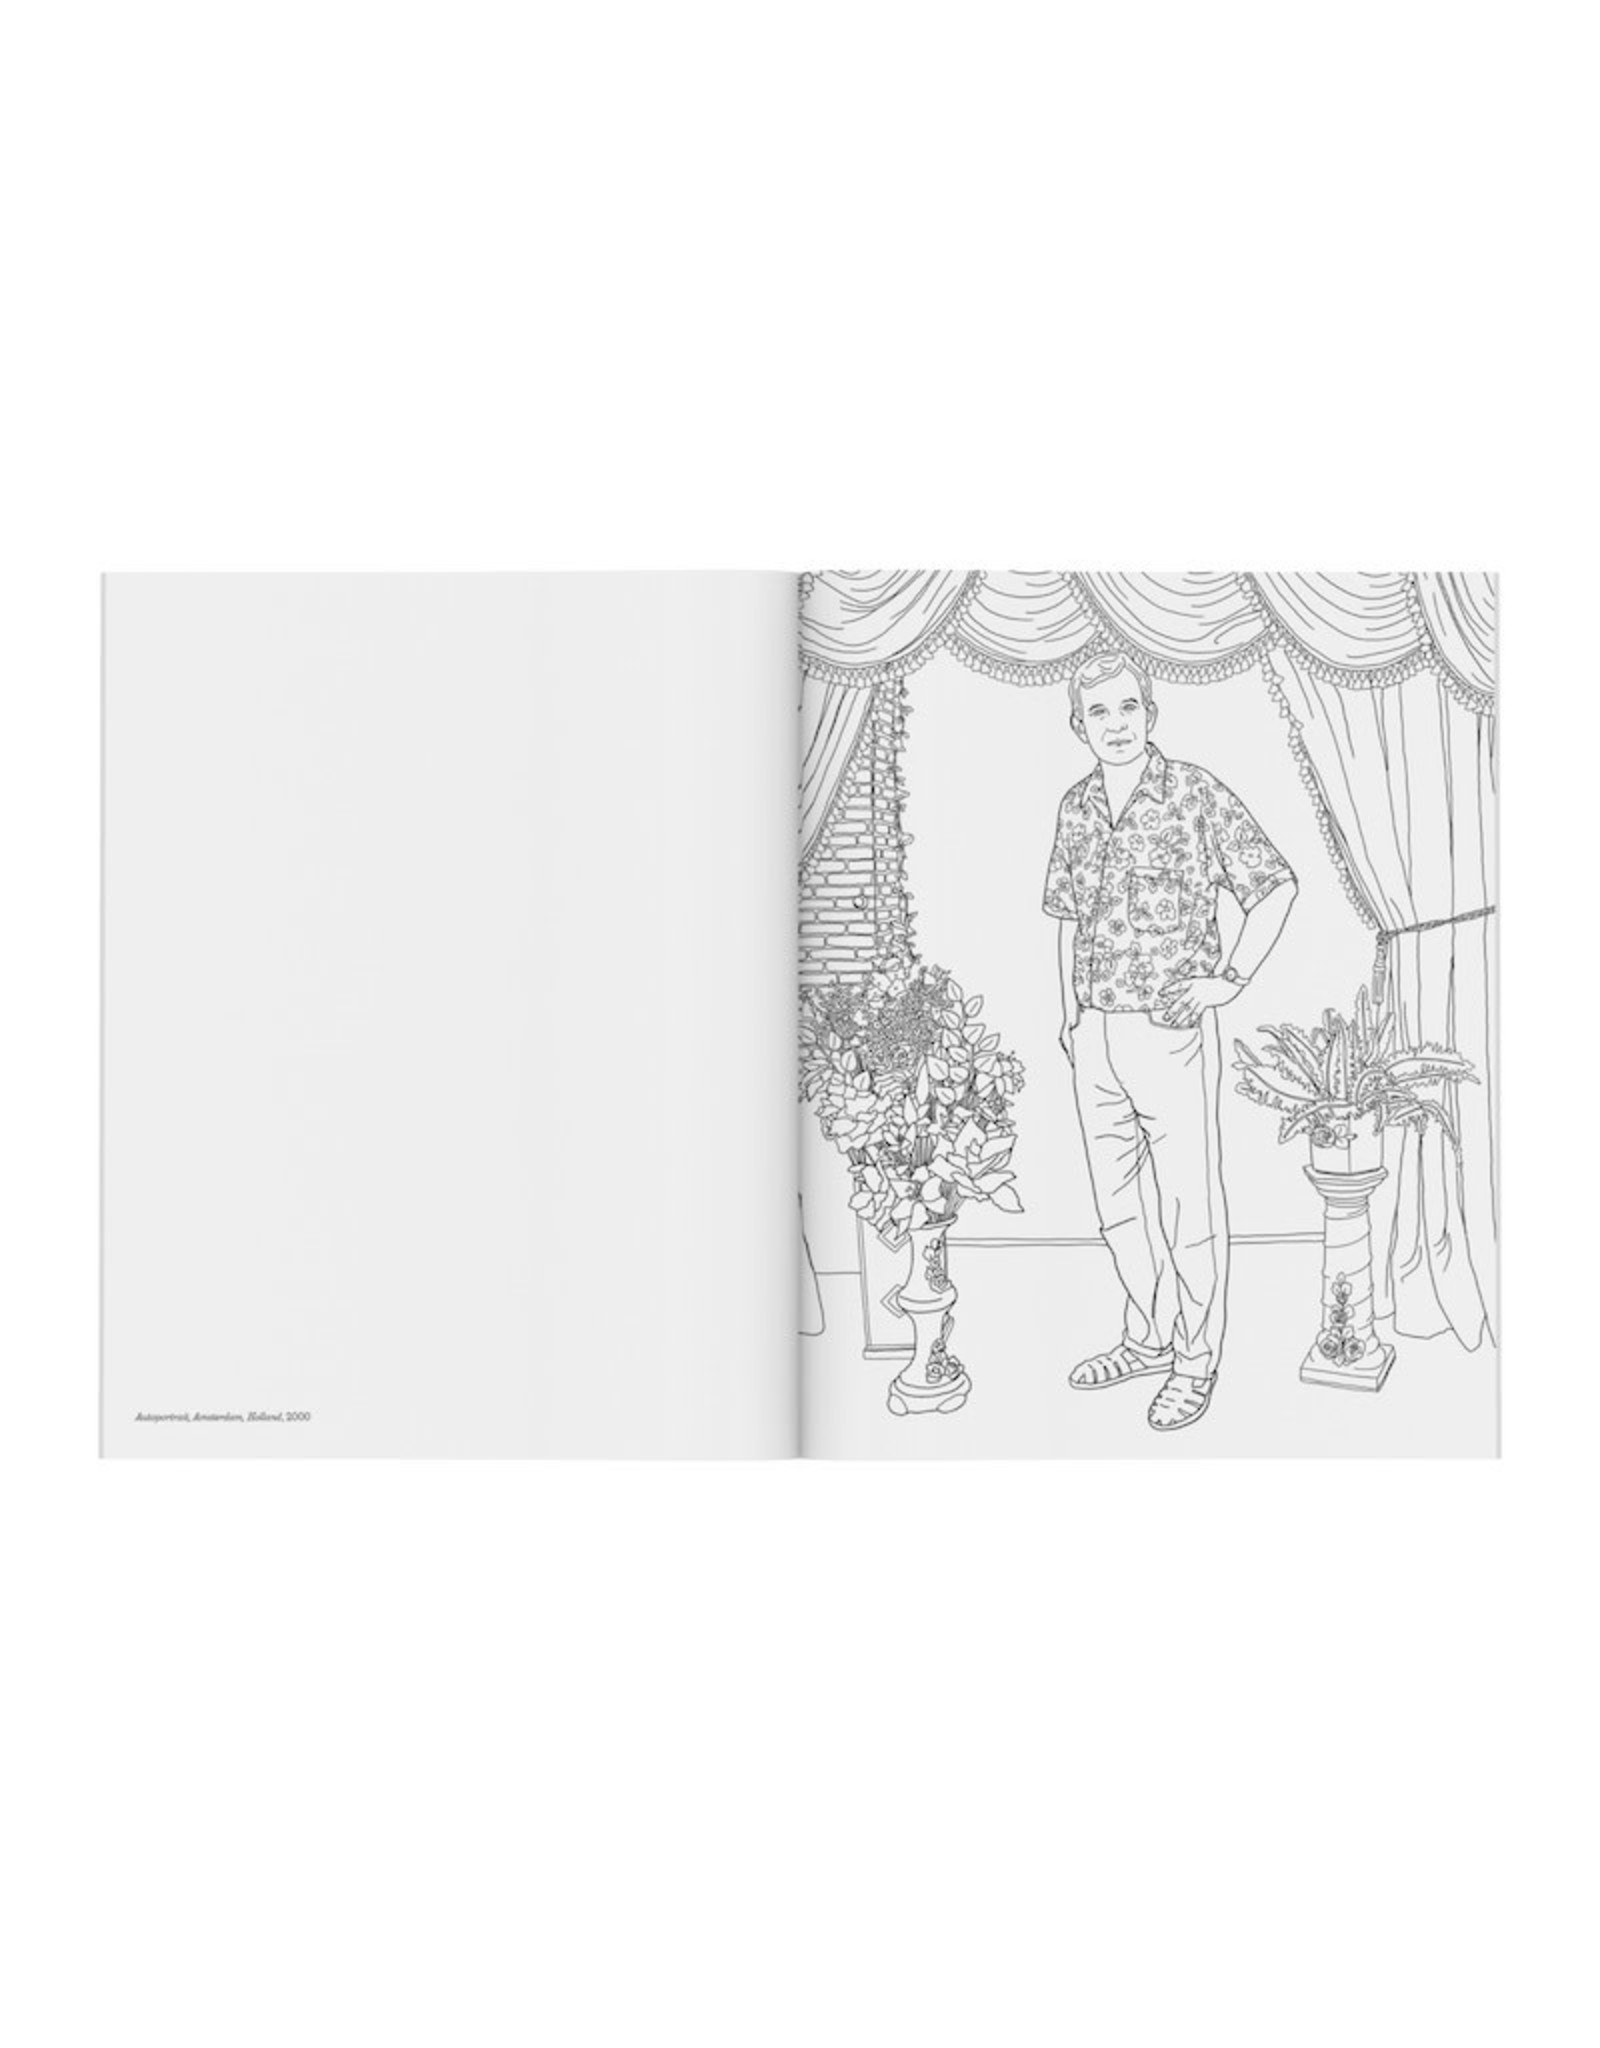 The Martin Parr Coloring Book!